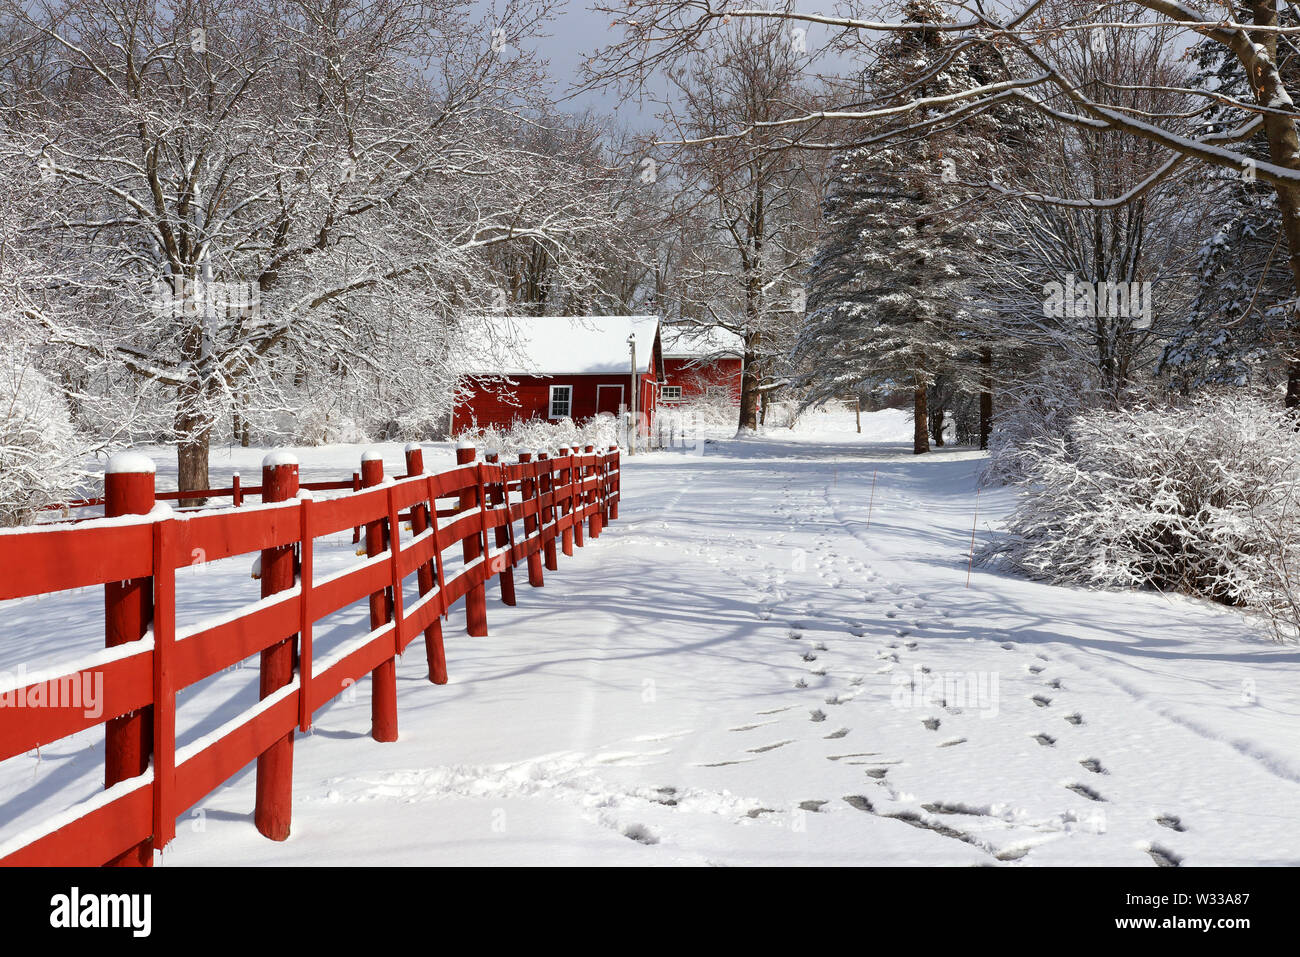 Rural landscape with red barns, wooden red fence and trees covered by fresh snow in sunlight. Scenic winter view at Wisconsin, Midwest USA, Madison ar Stock Photo